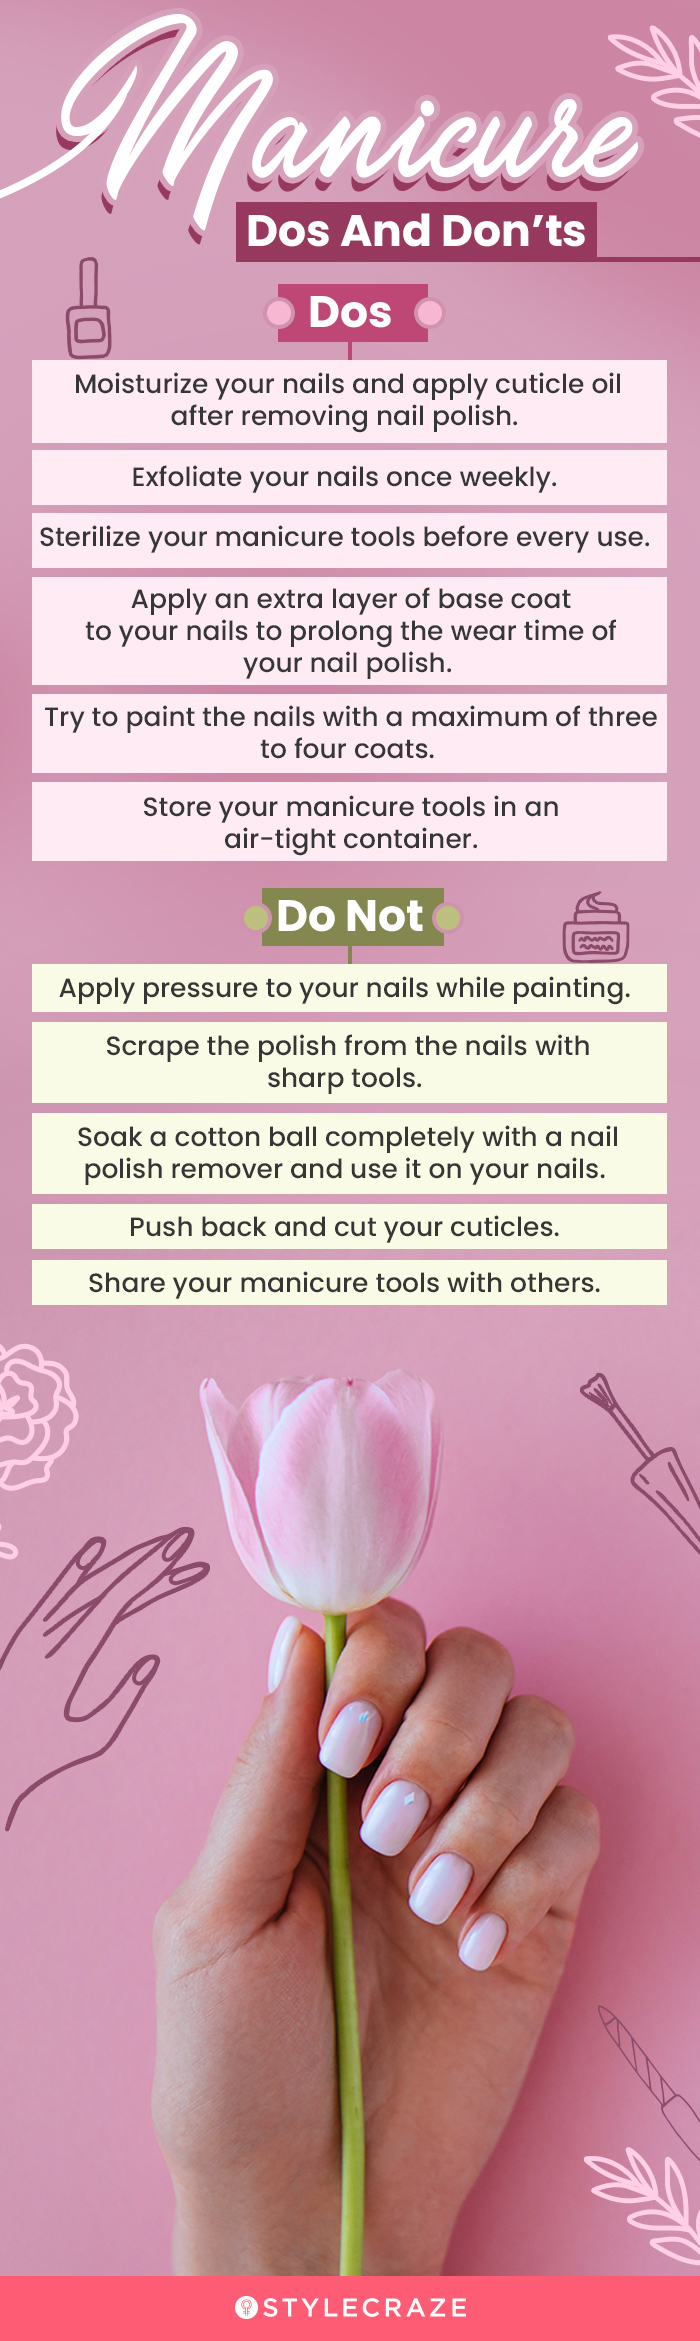 Manicure Dos And Don’ts (infographic)